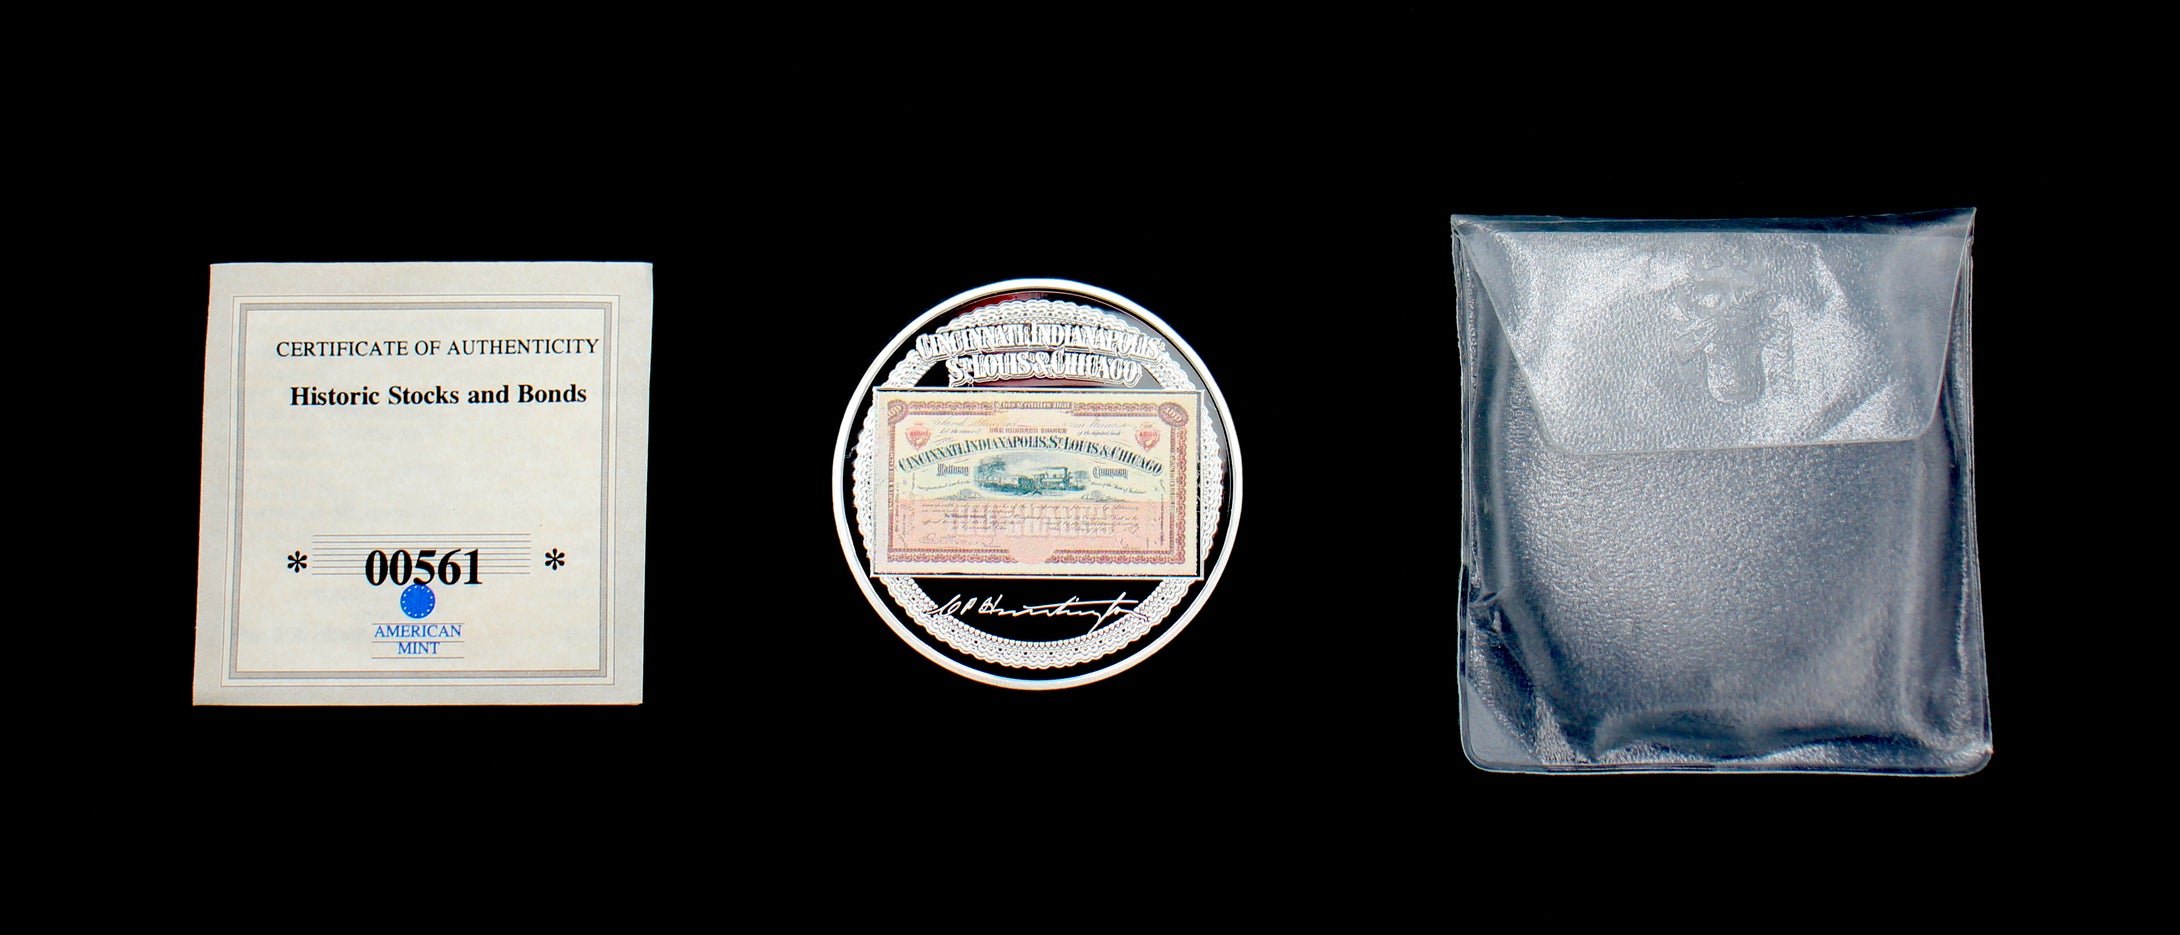 American Mint - Cincinnati, Indianapolis, St. Louis & Chicago Railway Company - Limited Edition Coin